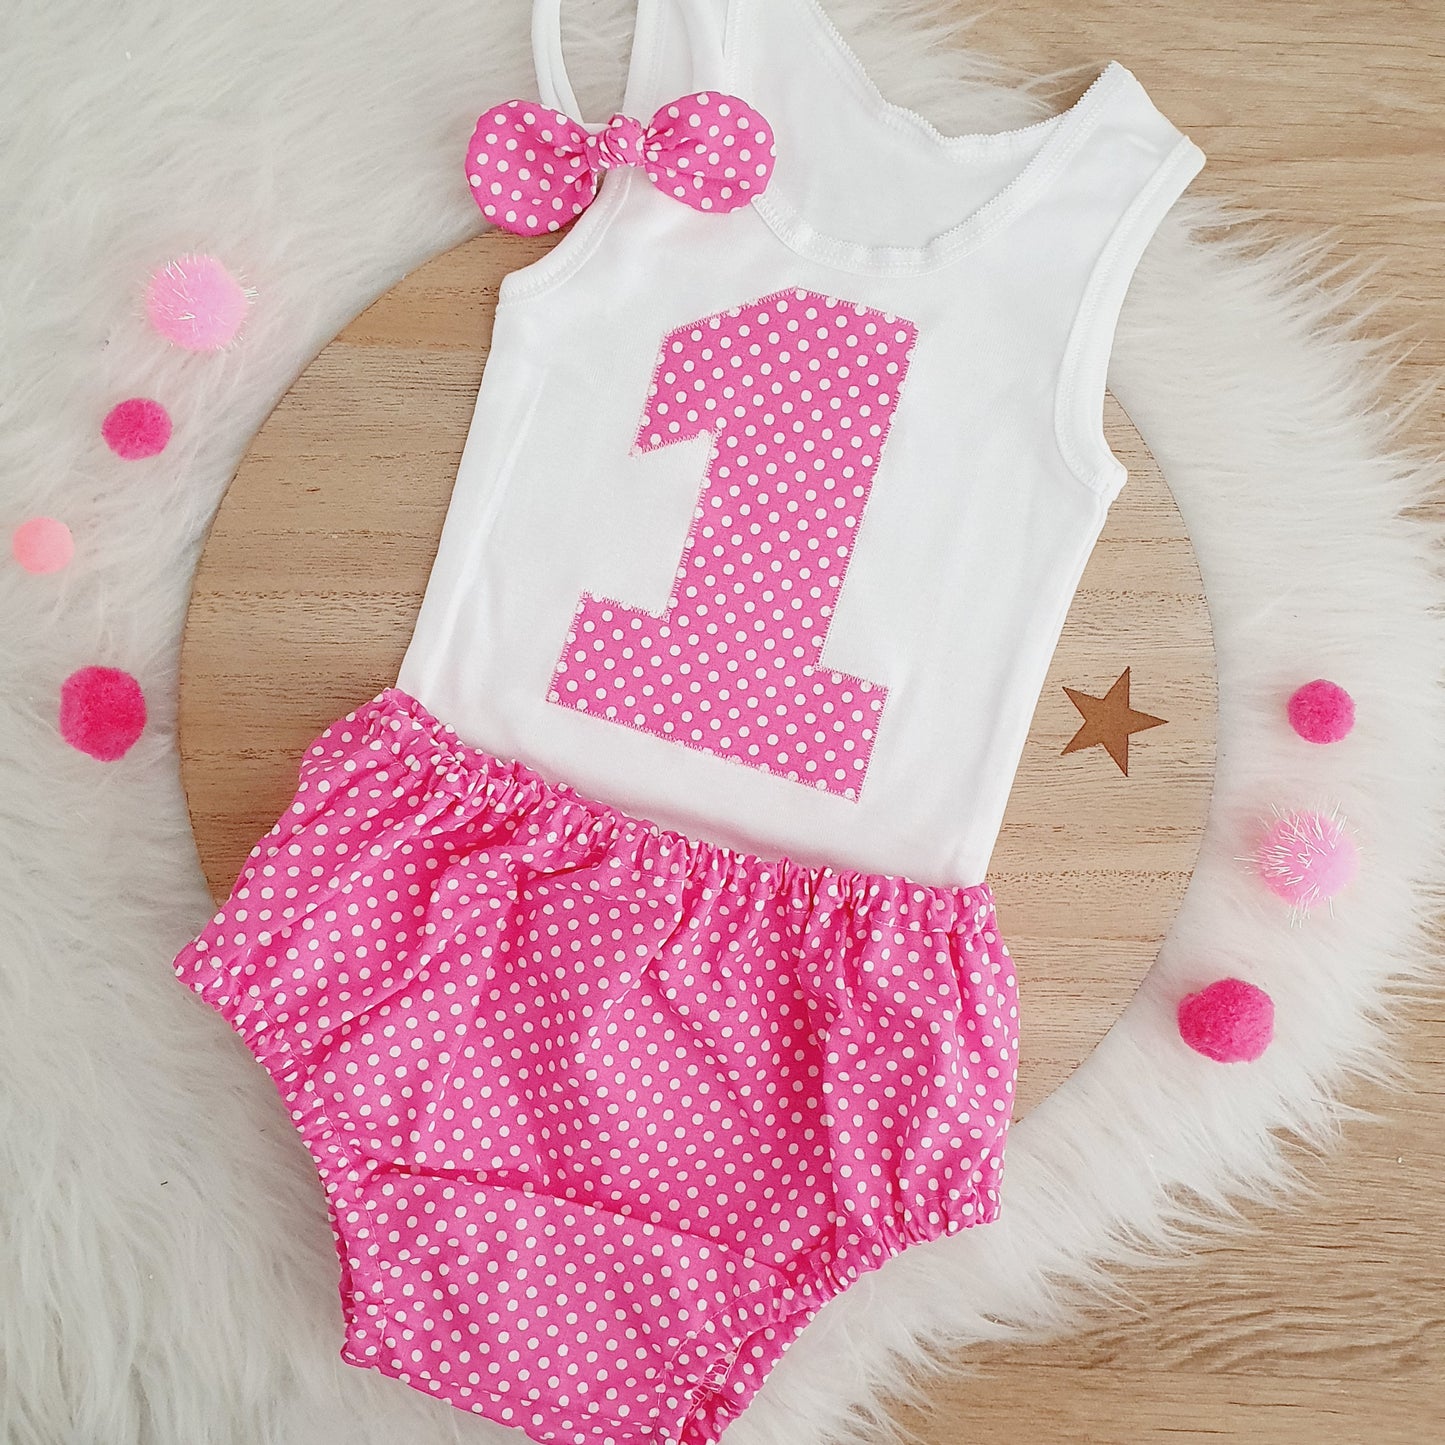 PINK AND WHITE DOT Girls 1st Birthday - Cake Smash Outfit, Size 1, Nappy Cover, Headband & Singlet Set